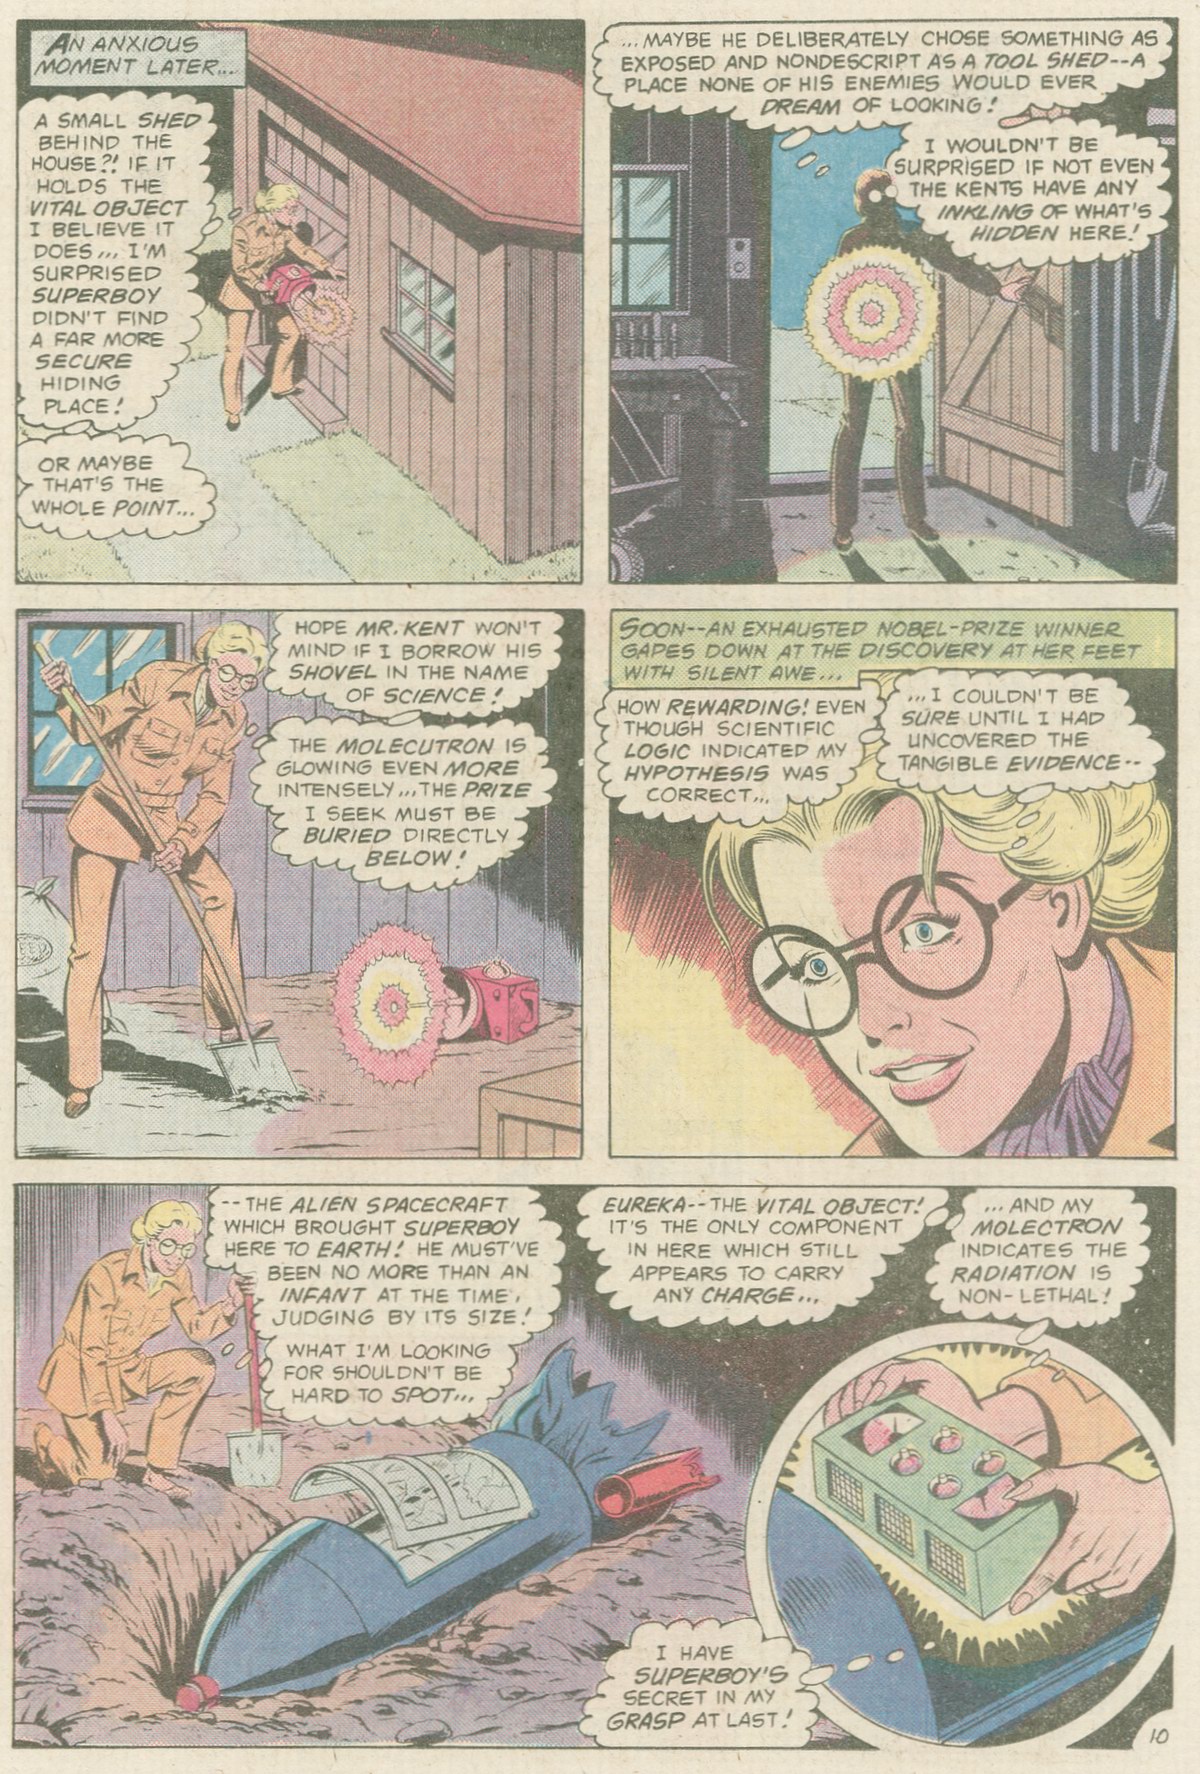 The New Adventures of Superboy 16 Page 10